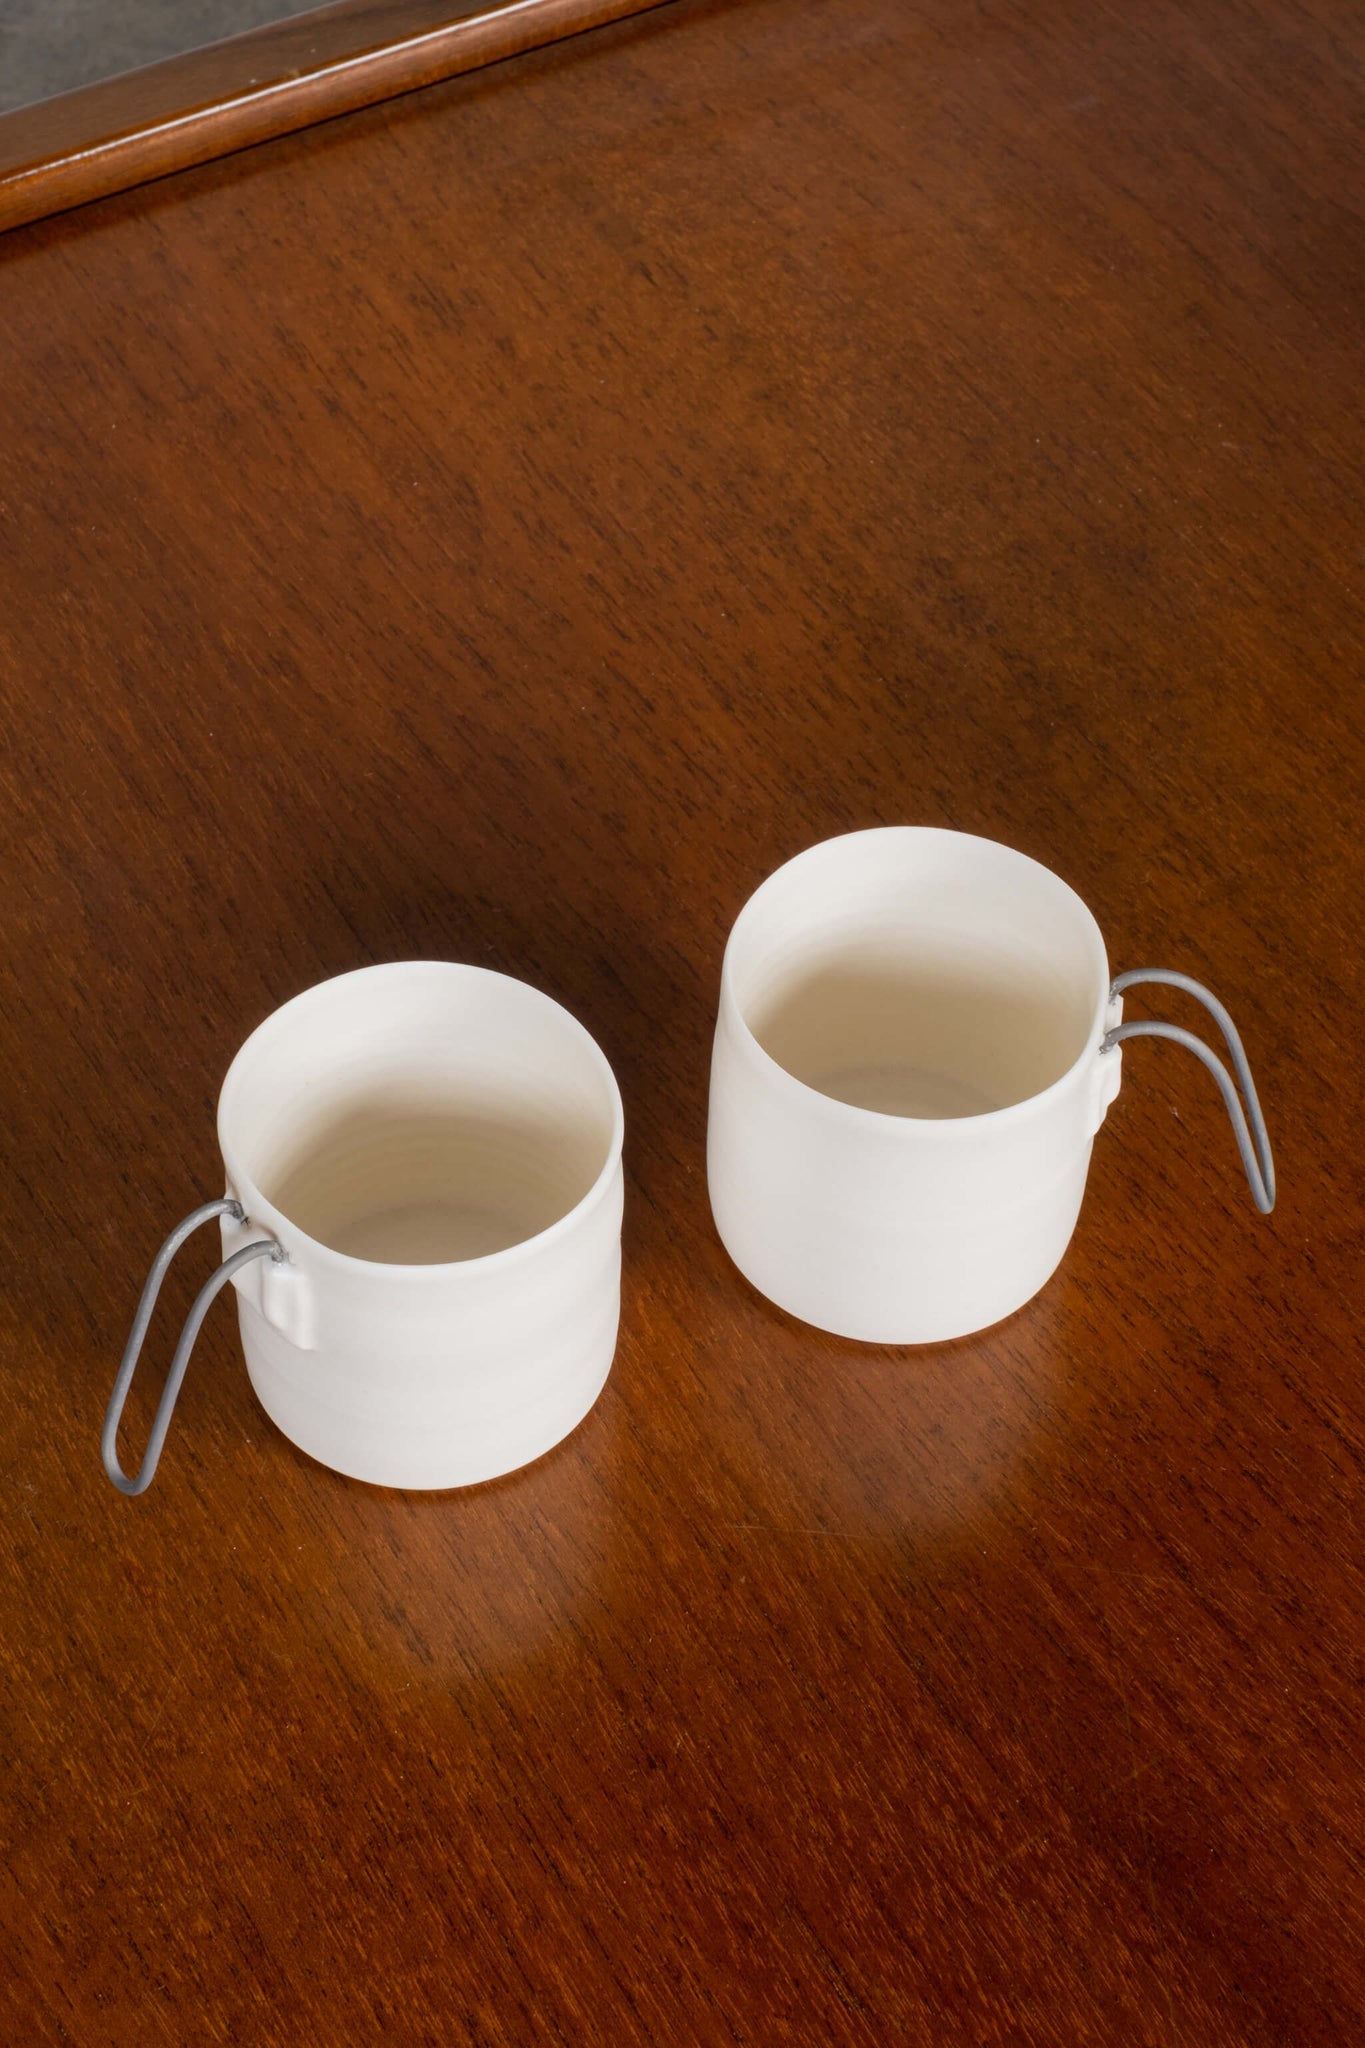 Porcelain Espresso cup with straight metal handle, top view, shown side by side